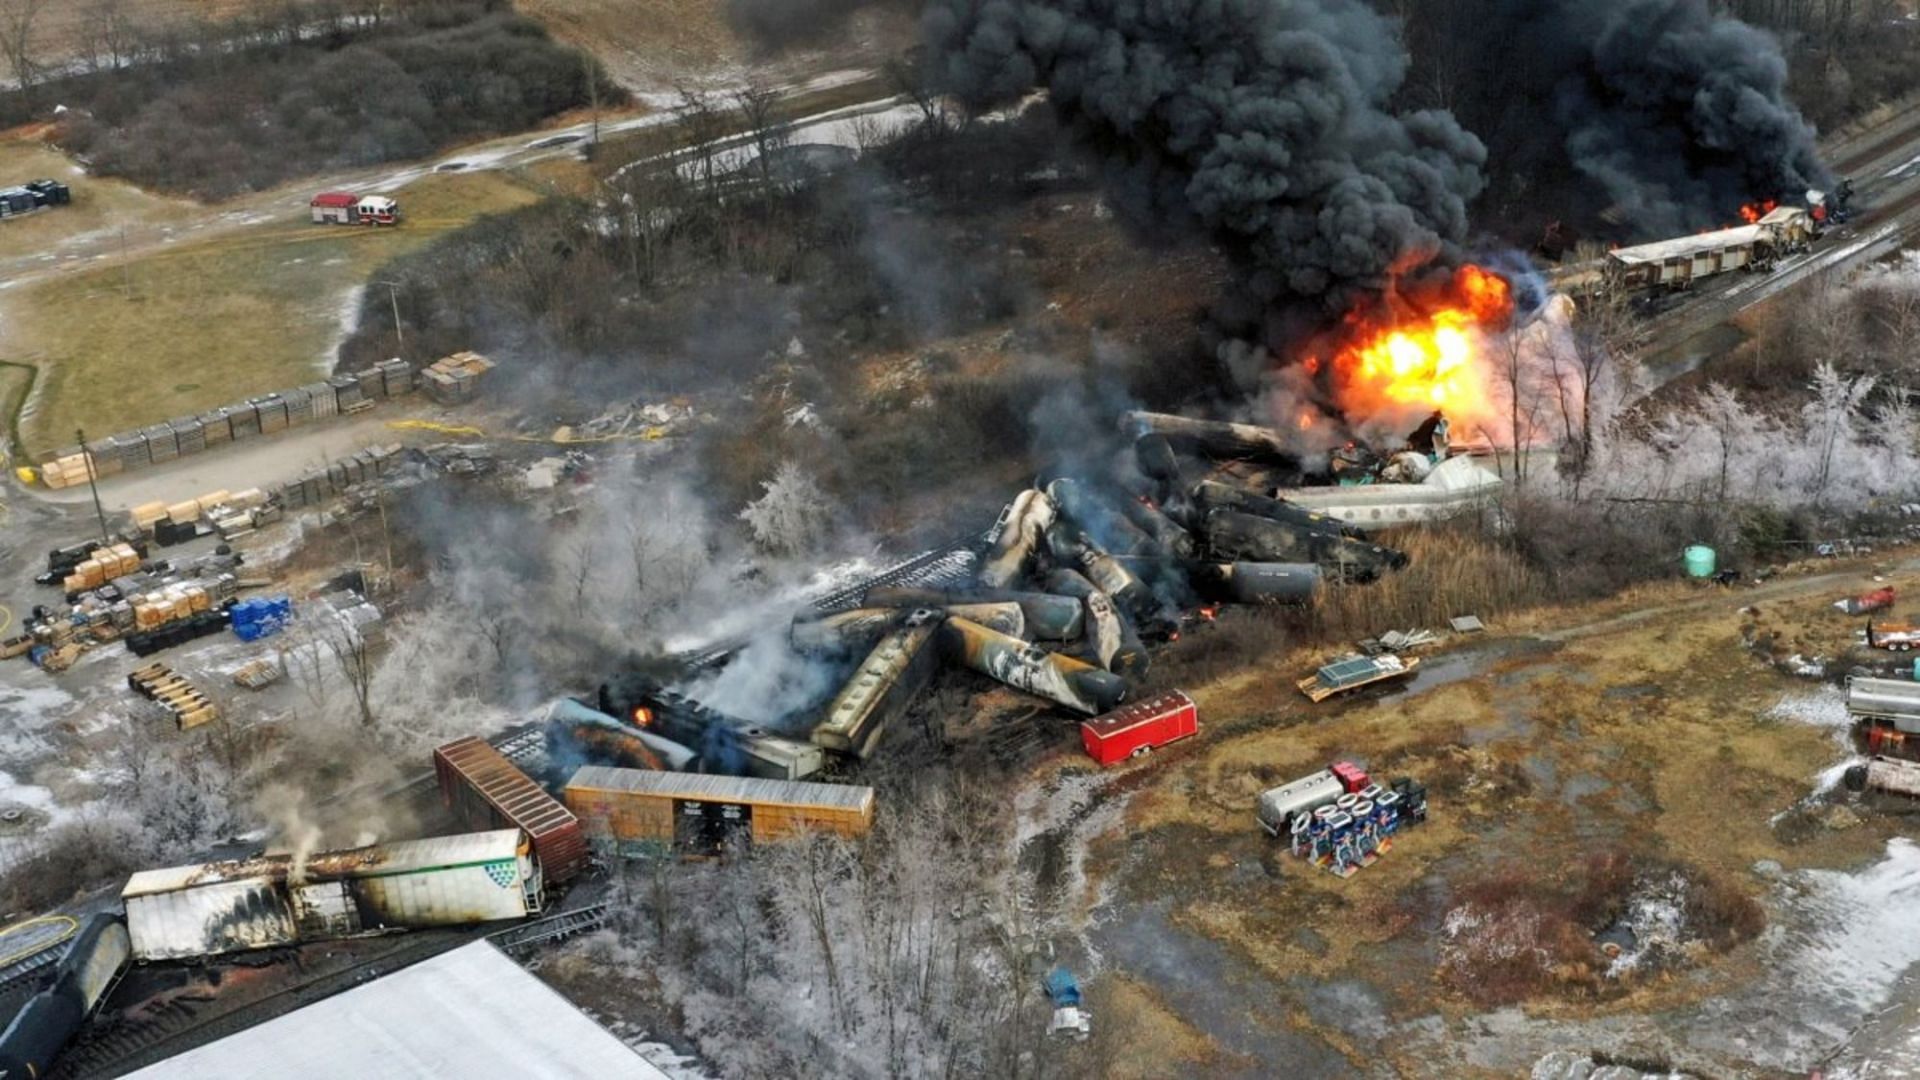 List of chemicals released from East Palestine, Ohio train wreck explored (Image via AP)